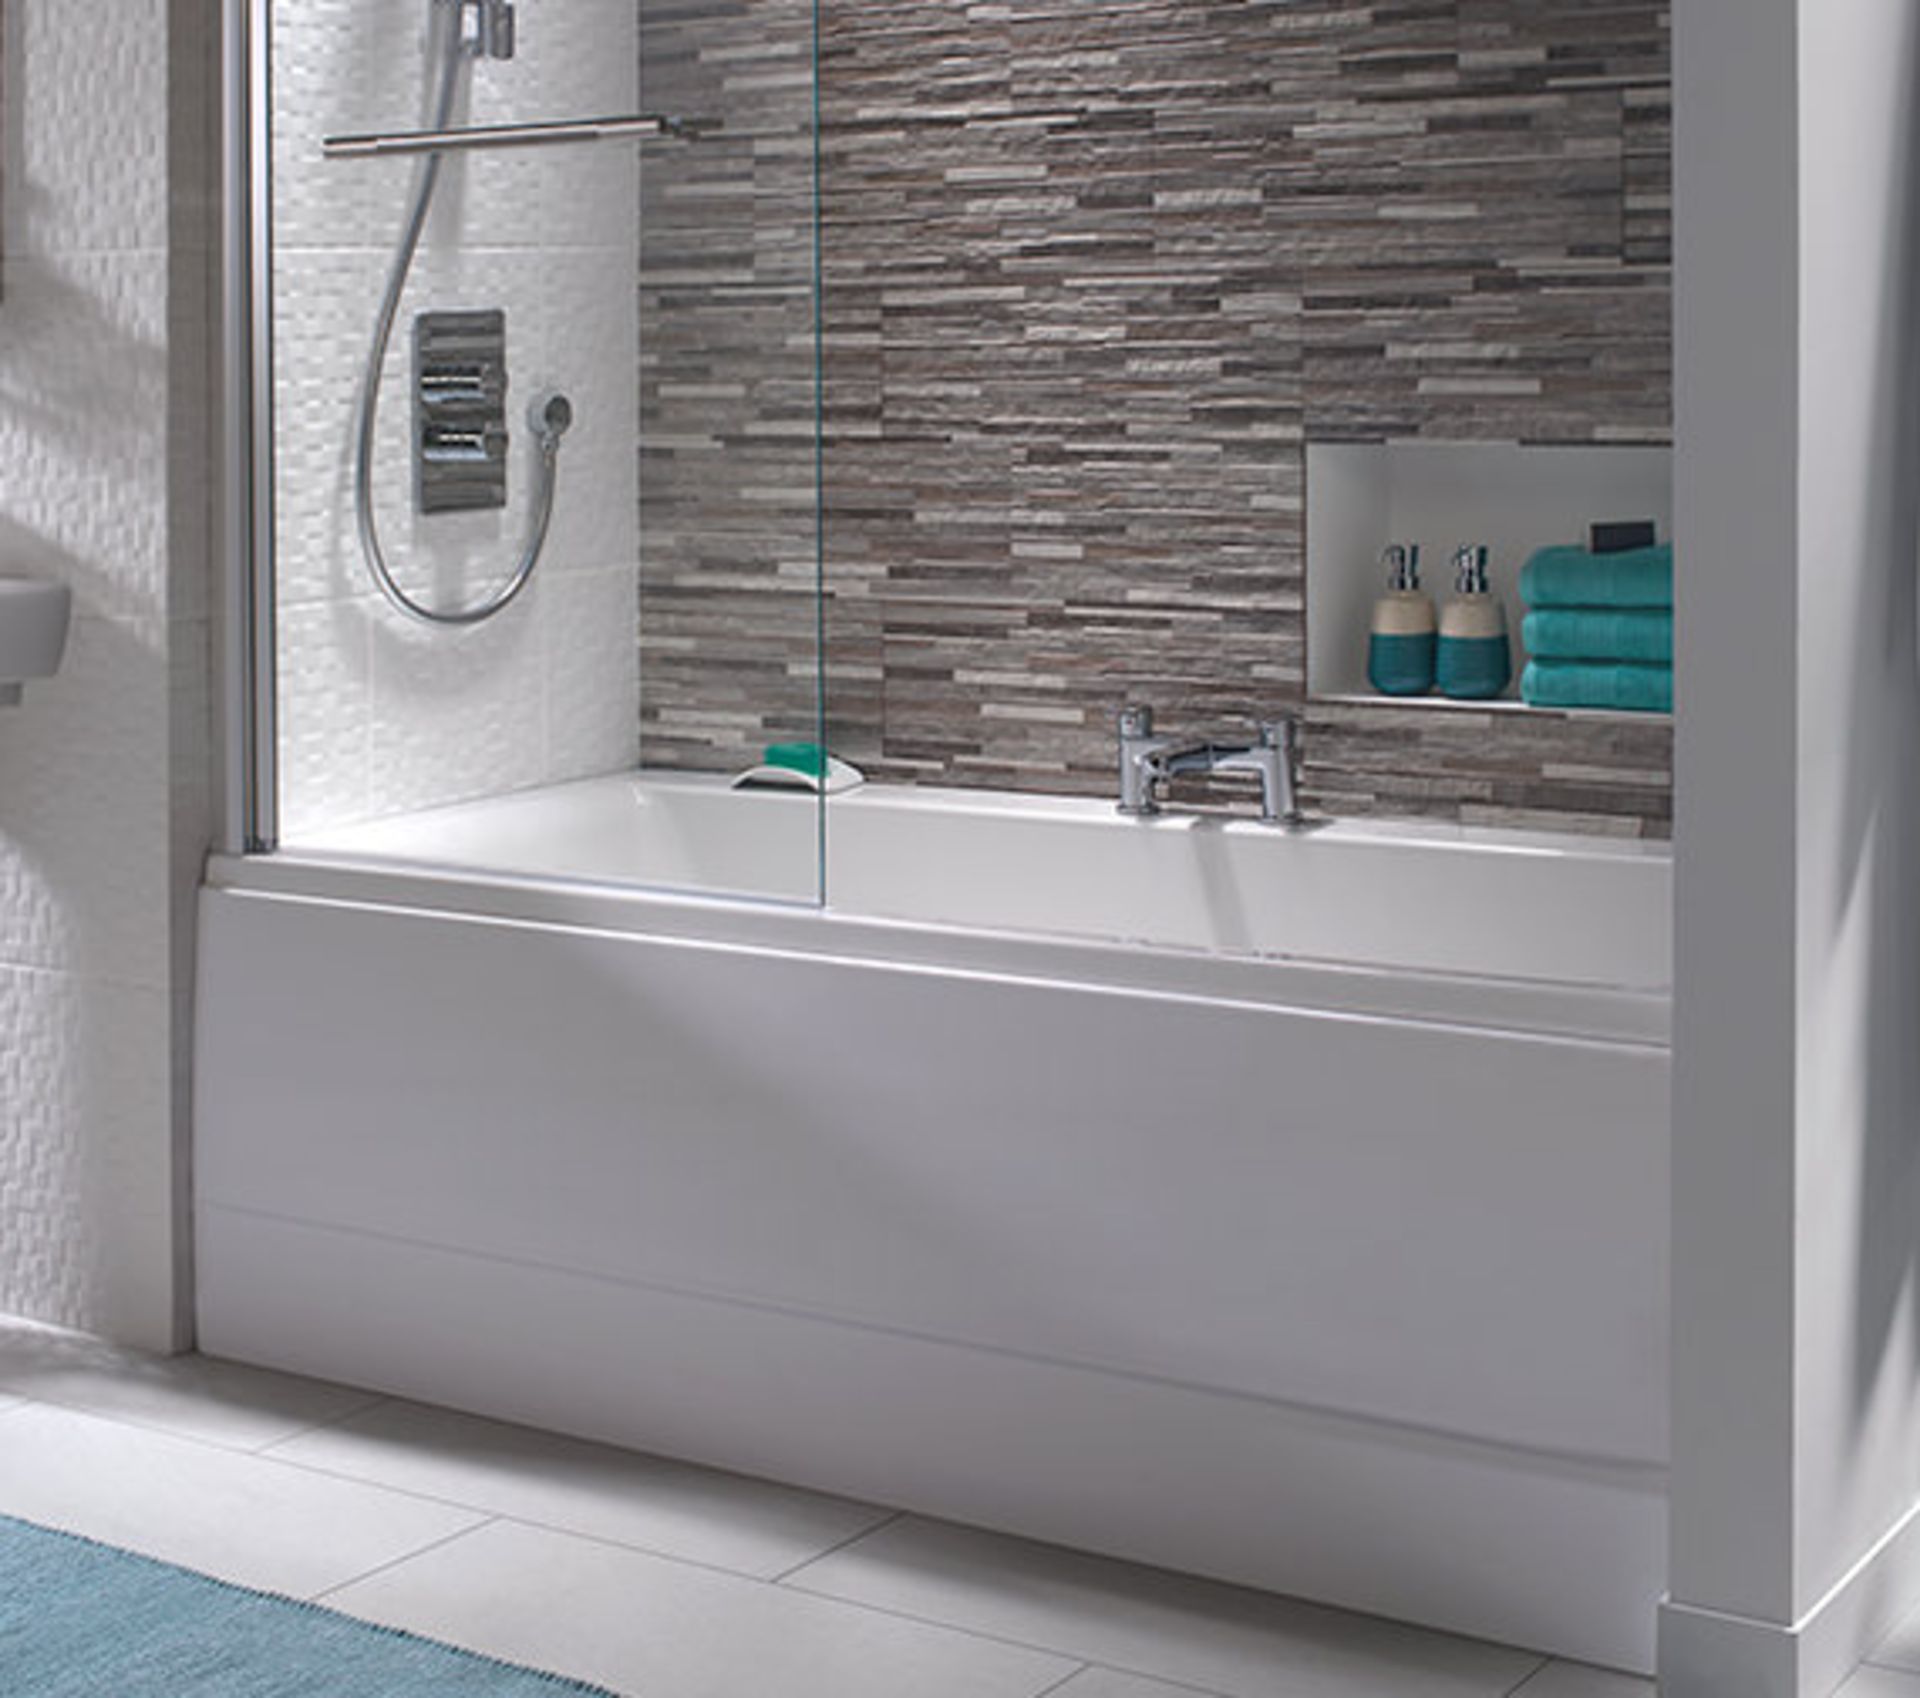 (PC12) 1700x750mm Twyfords Clarissa Plus Double Ended White Bath Tub. RRP £442.99. The Twyford...( - Image 4 of 4